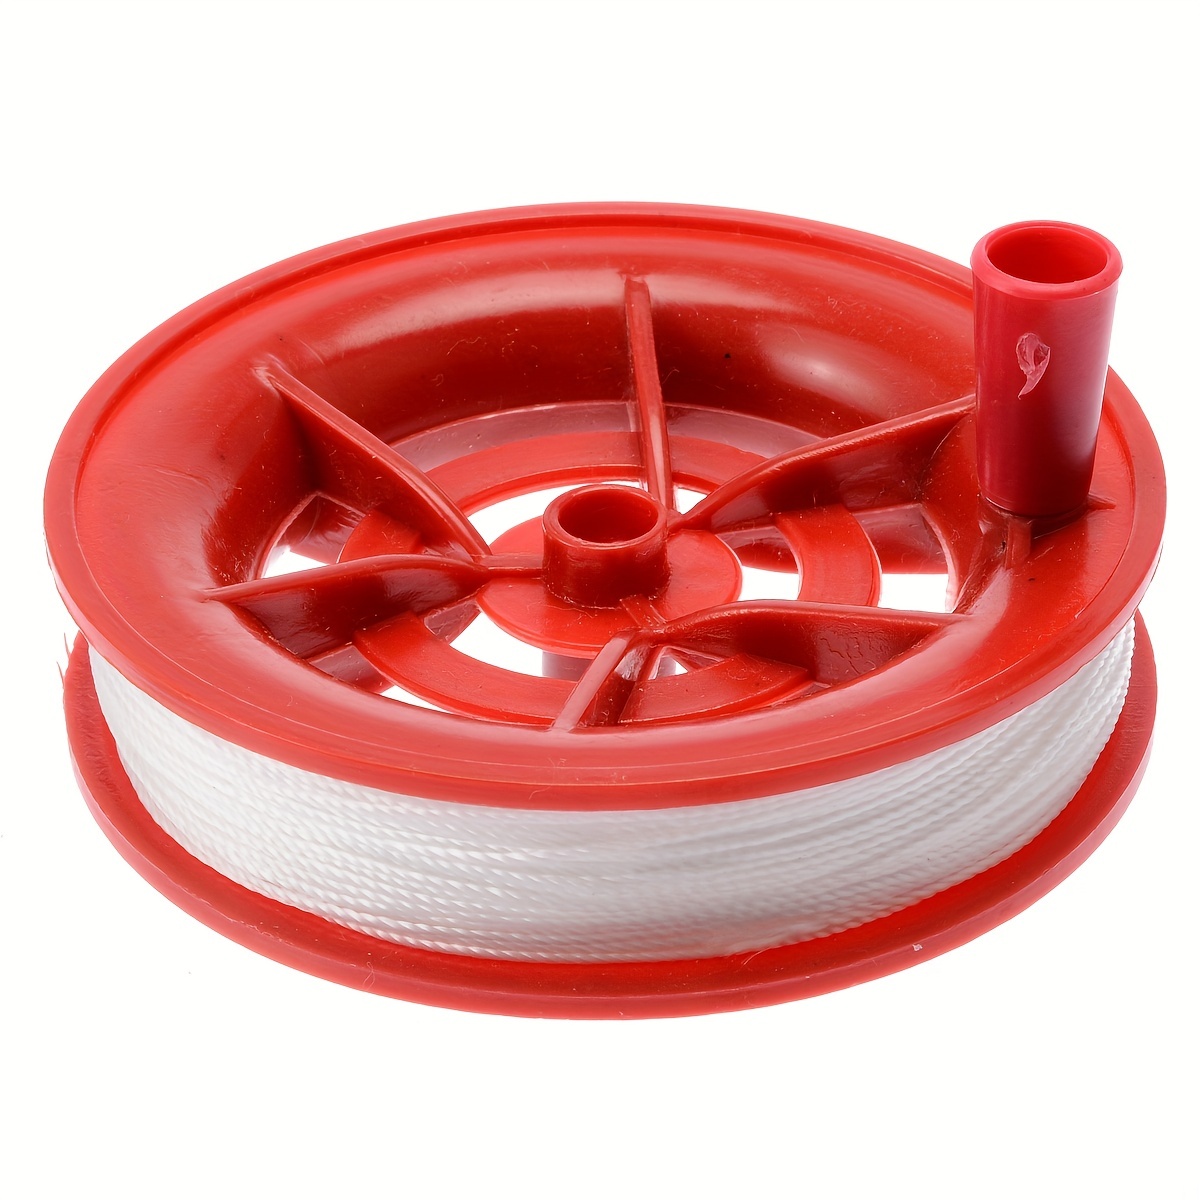 1 Set of Kite Reel with Automatic Hand Lock Holding Plastic